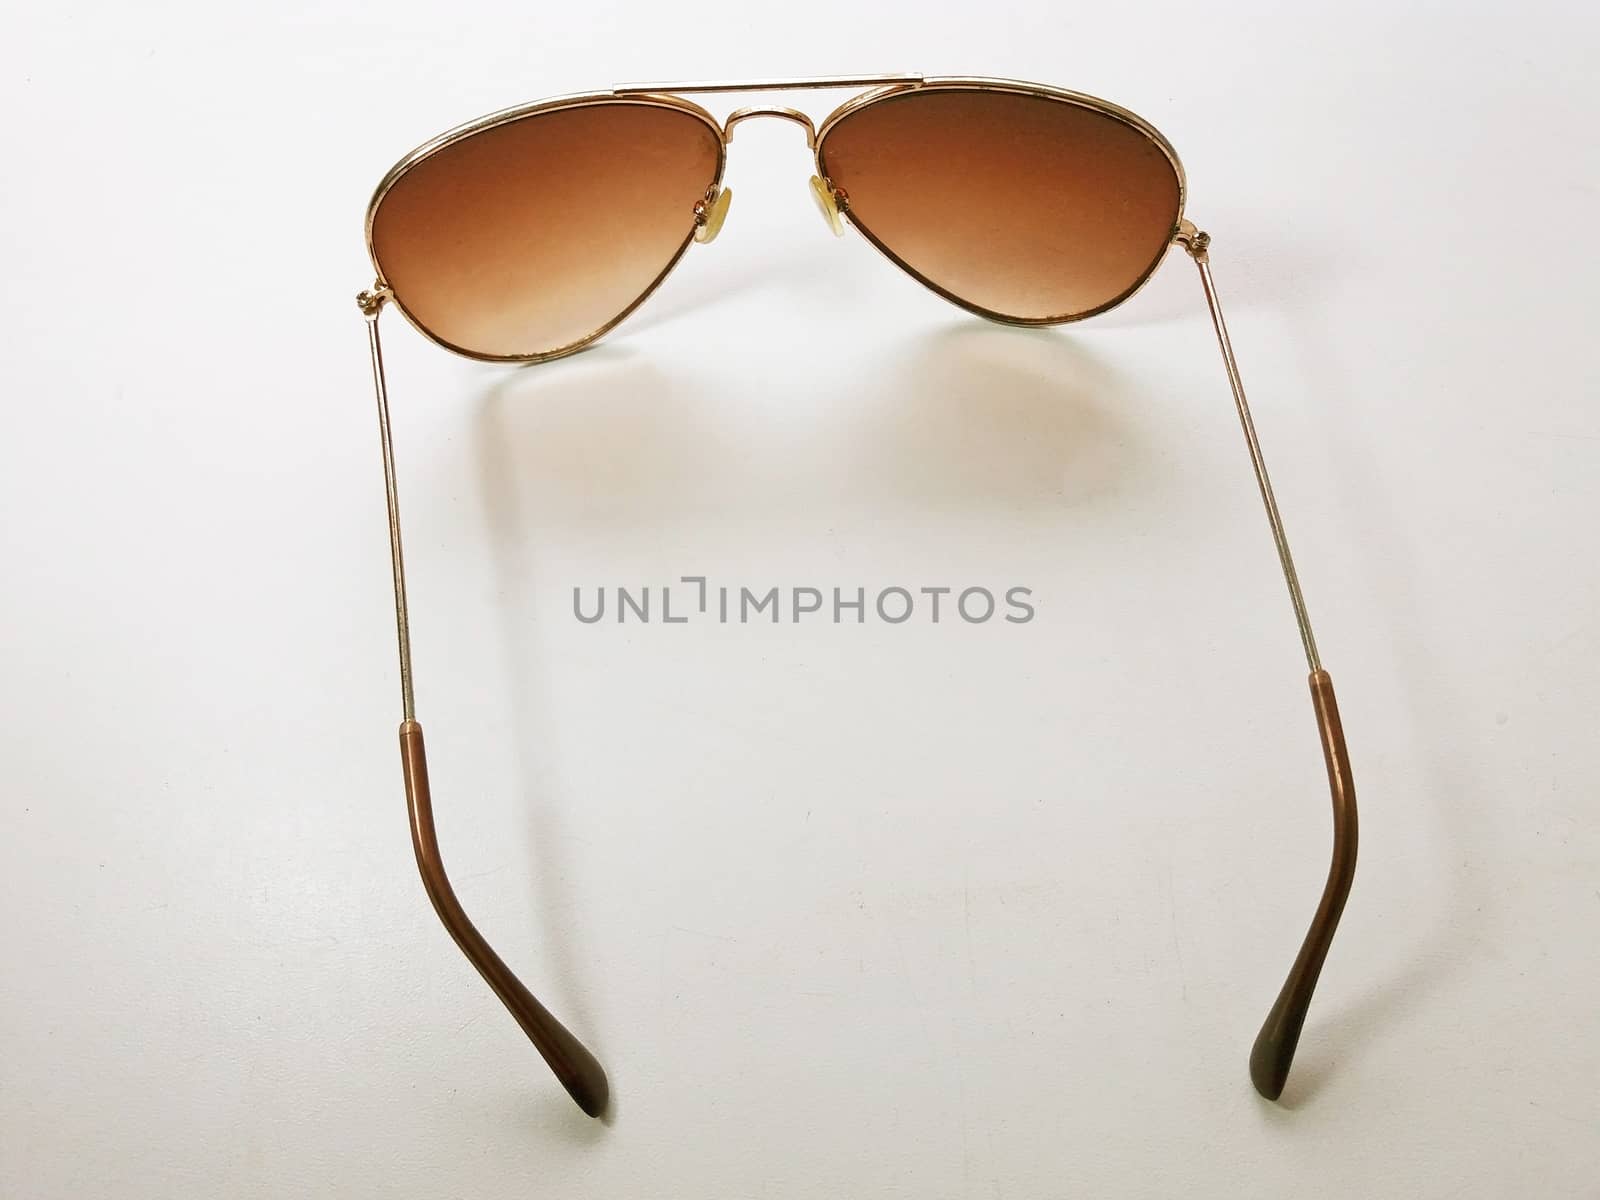 Nice sunglases on white background glasses with brown glass